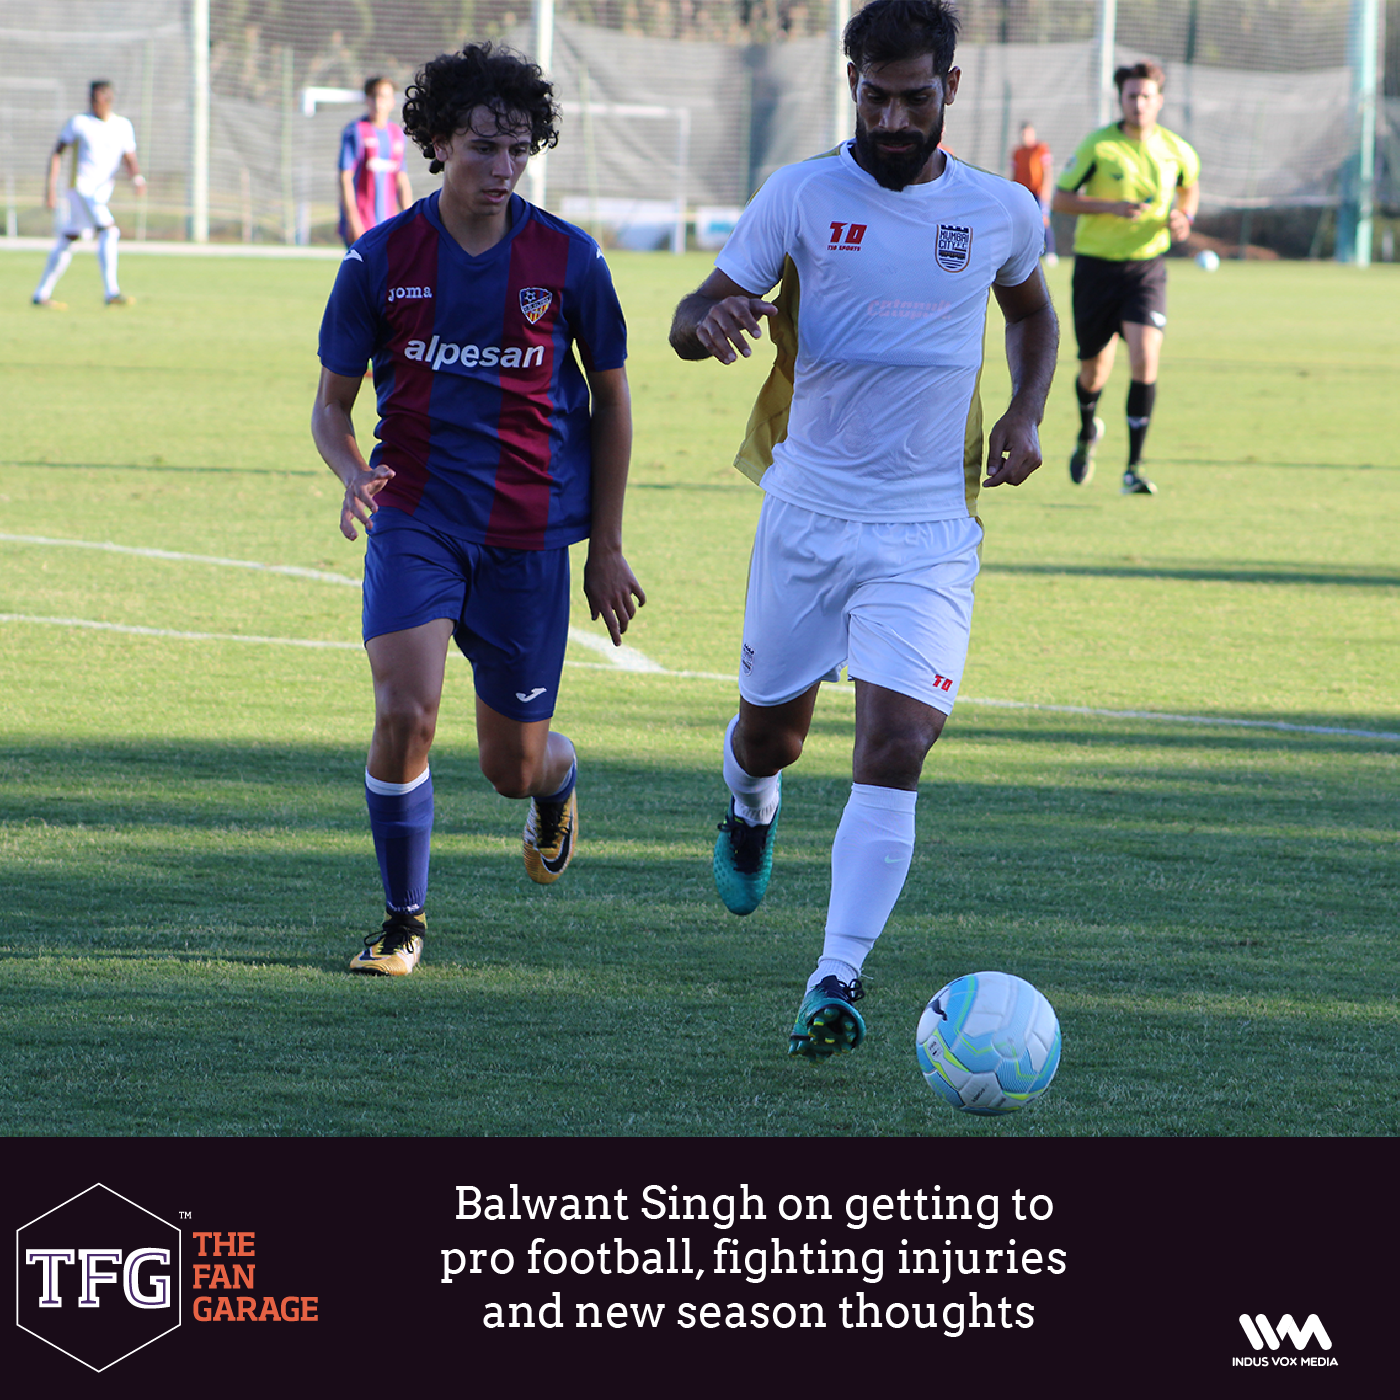 TFG interviews Ep. 039: Balwant Singh on getting to pro football, fighting injuries and new season thoughts